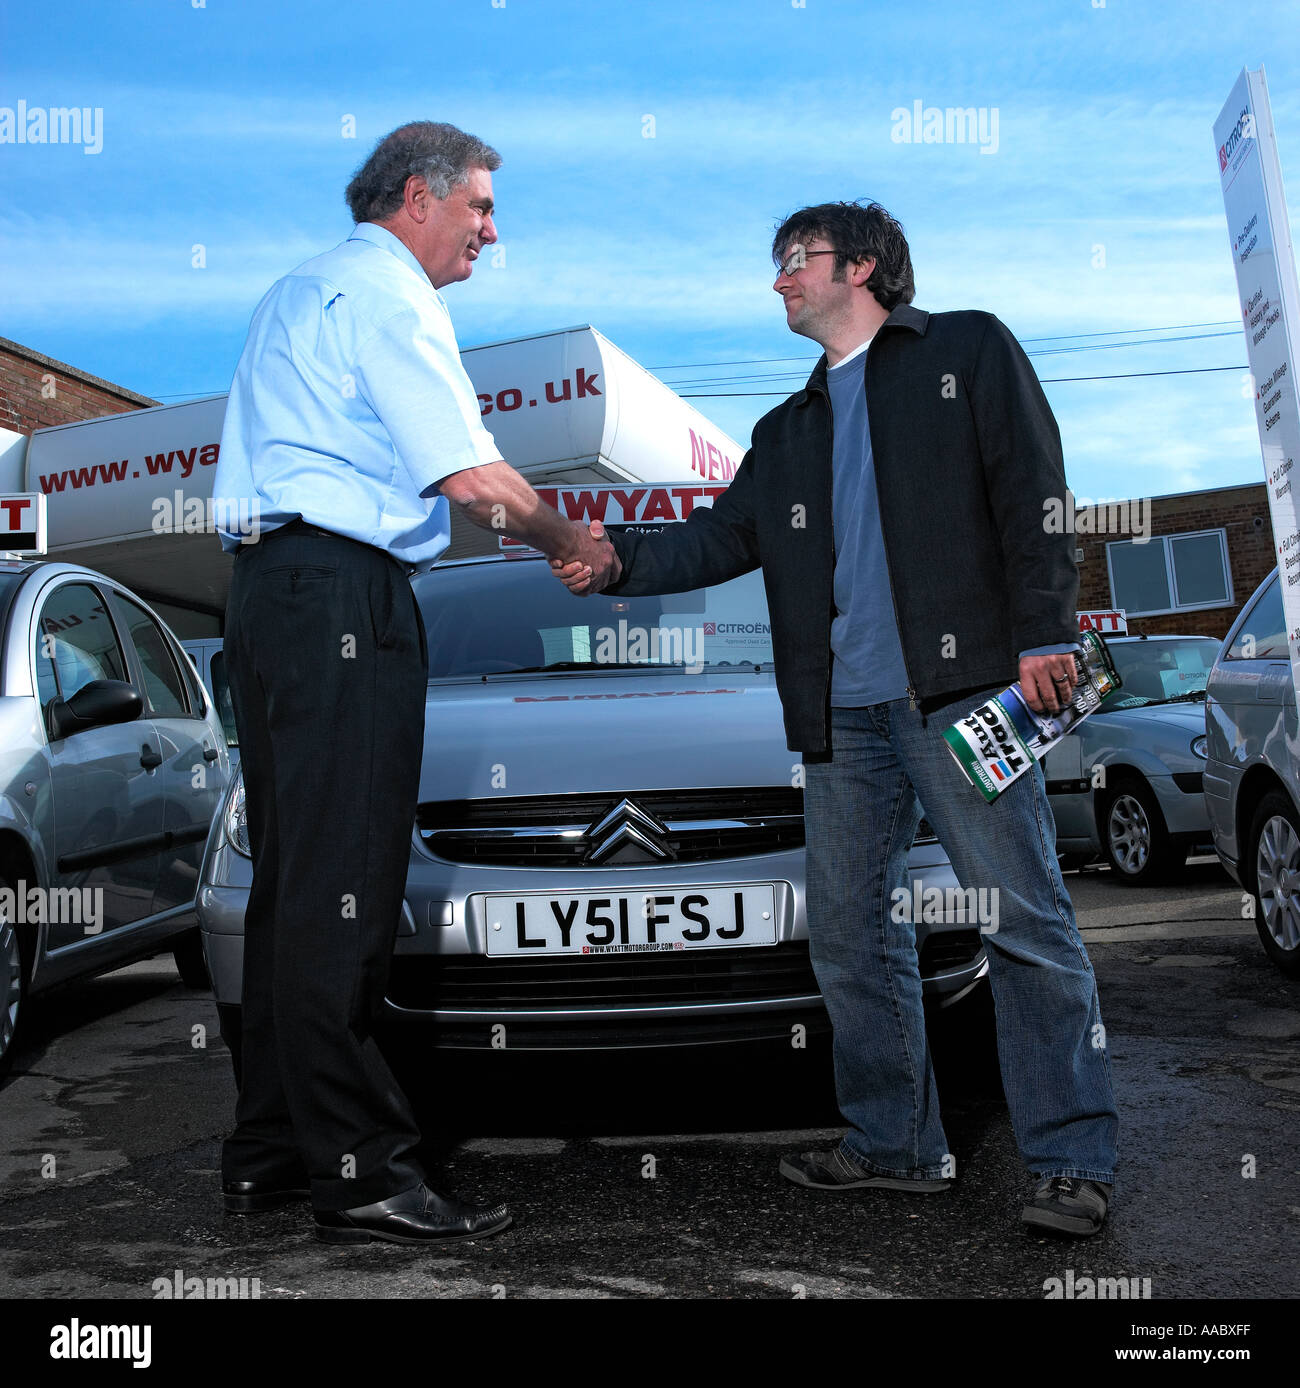 A car salesman shaking hands with a customer after clinching a sale Stock Photo